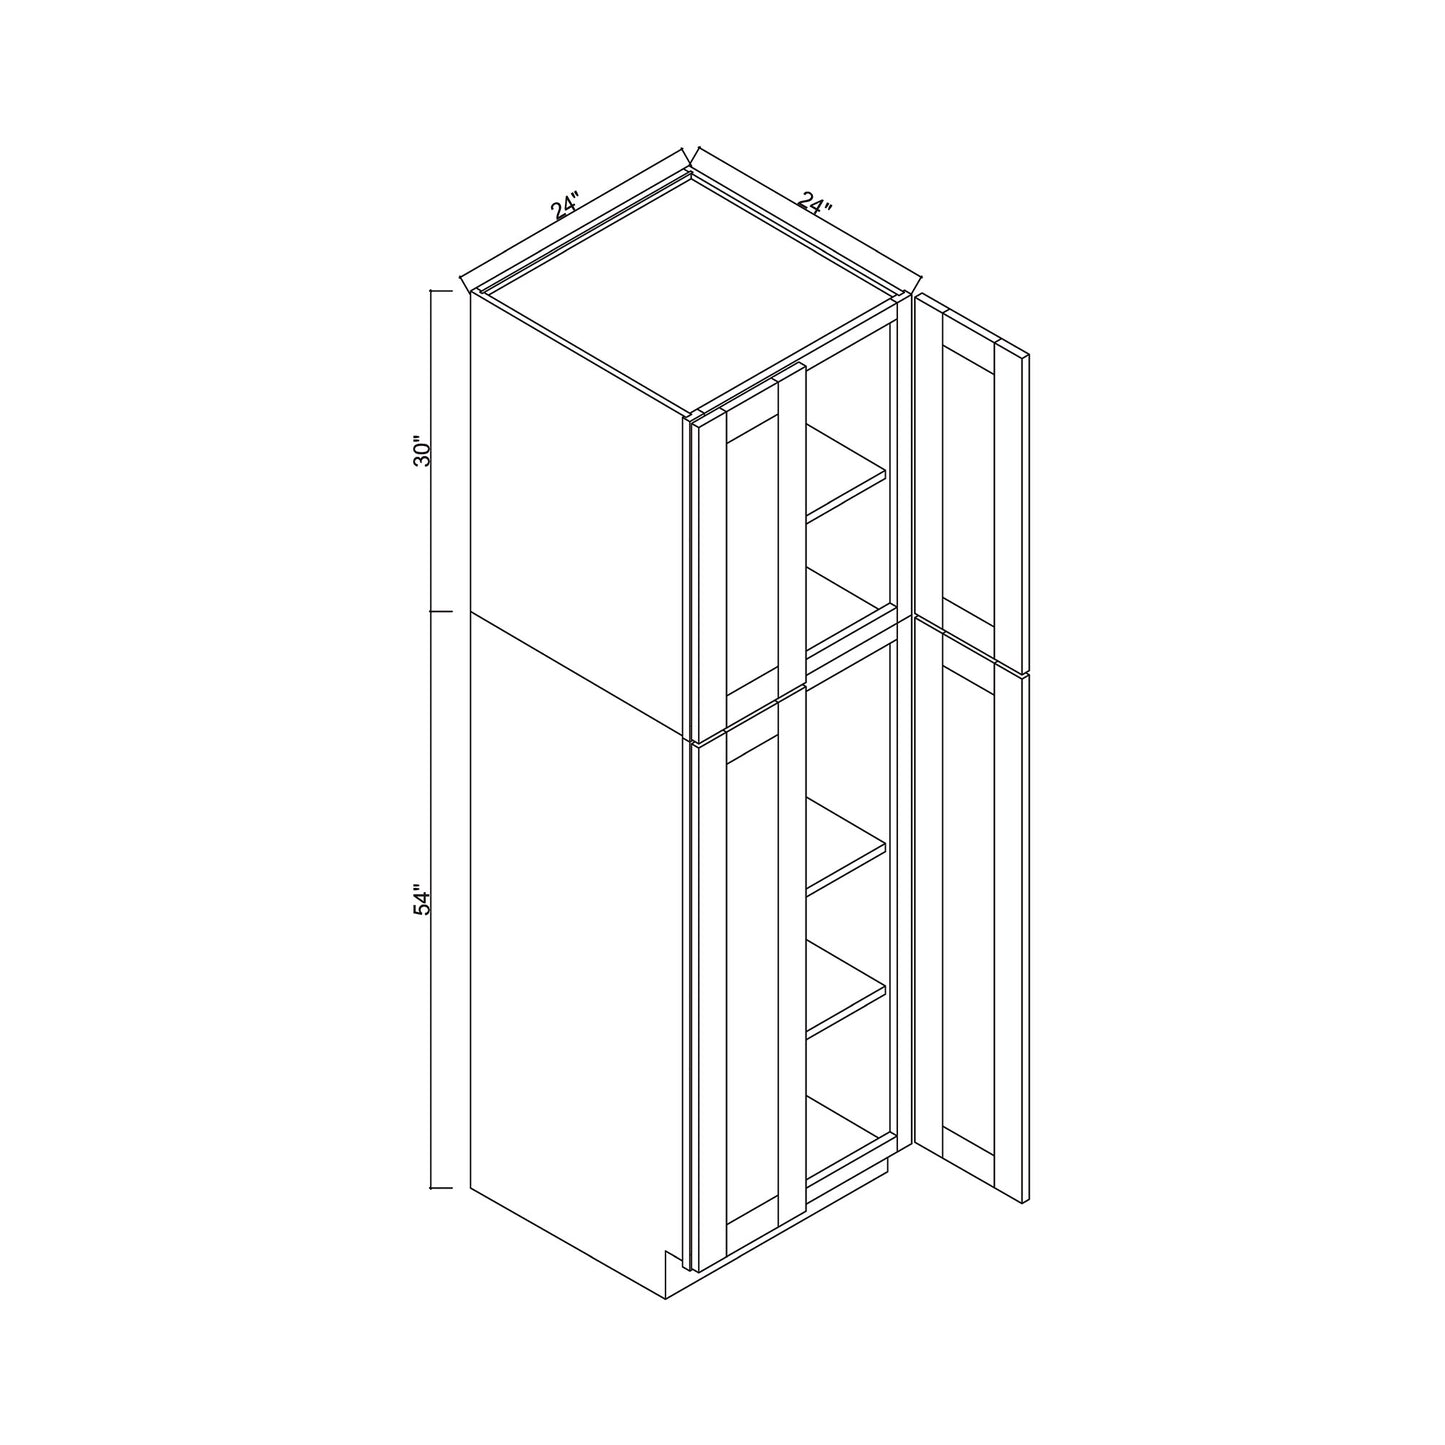 24" x 84" Pantry Cabinet